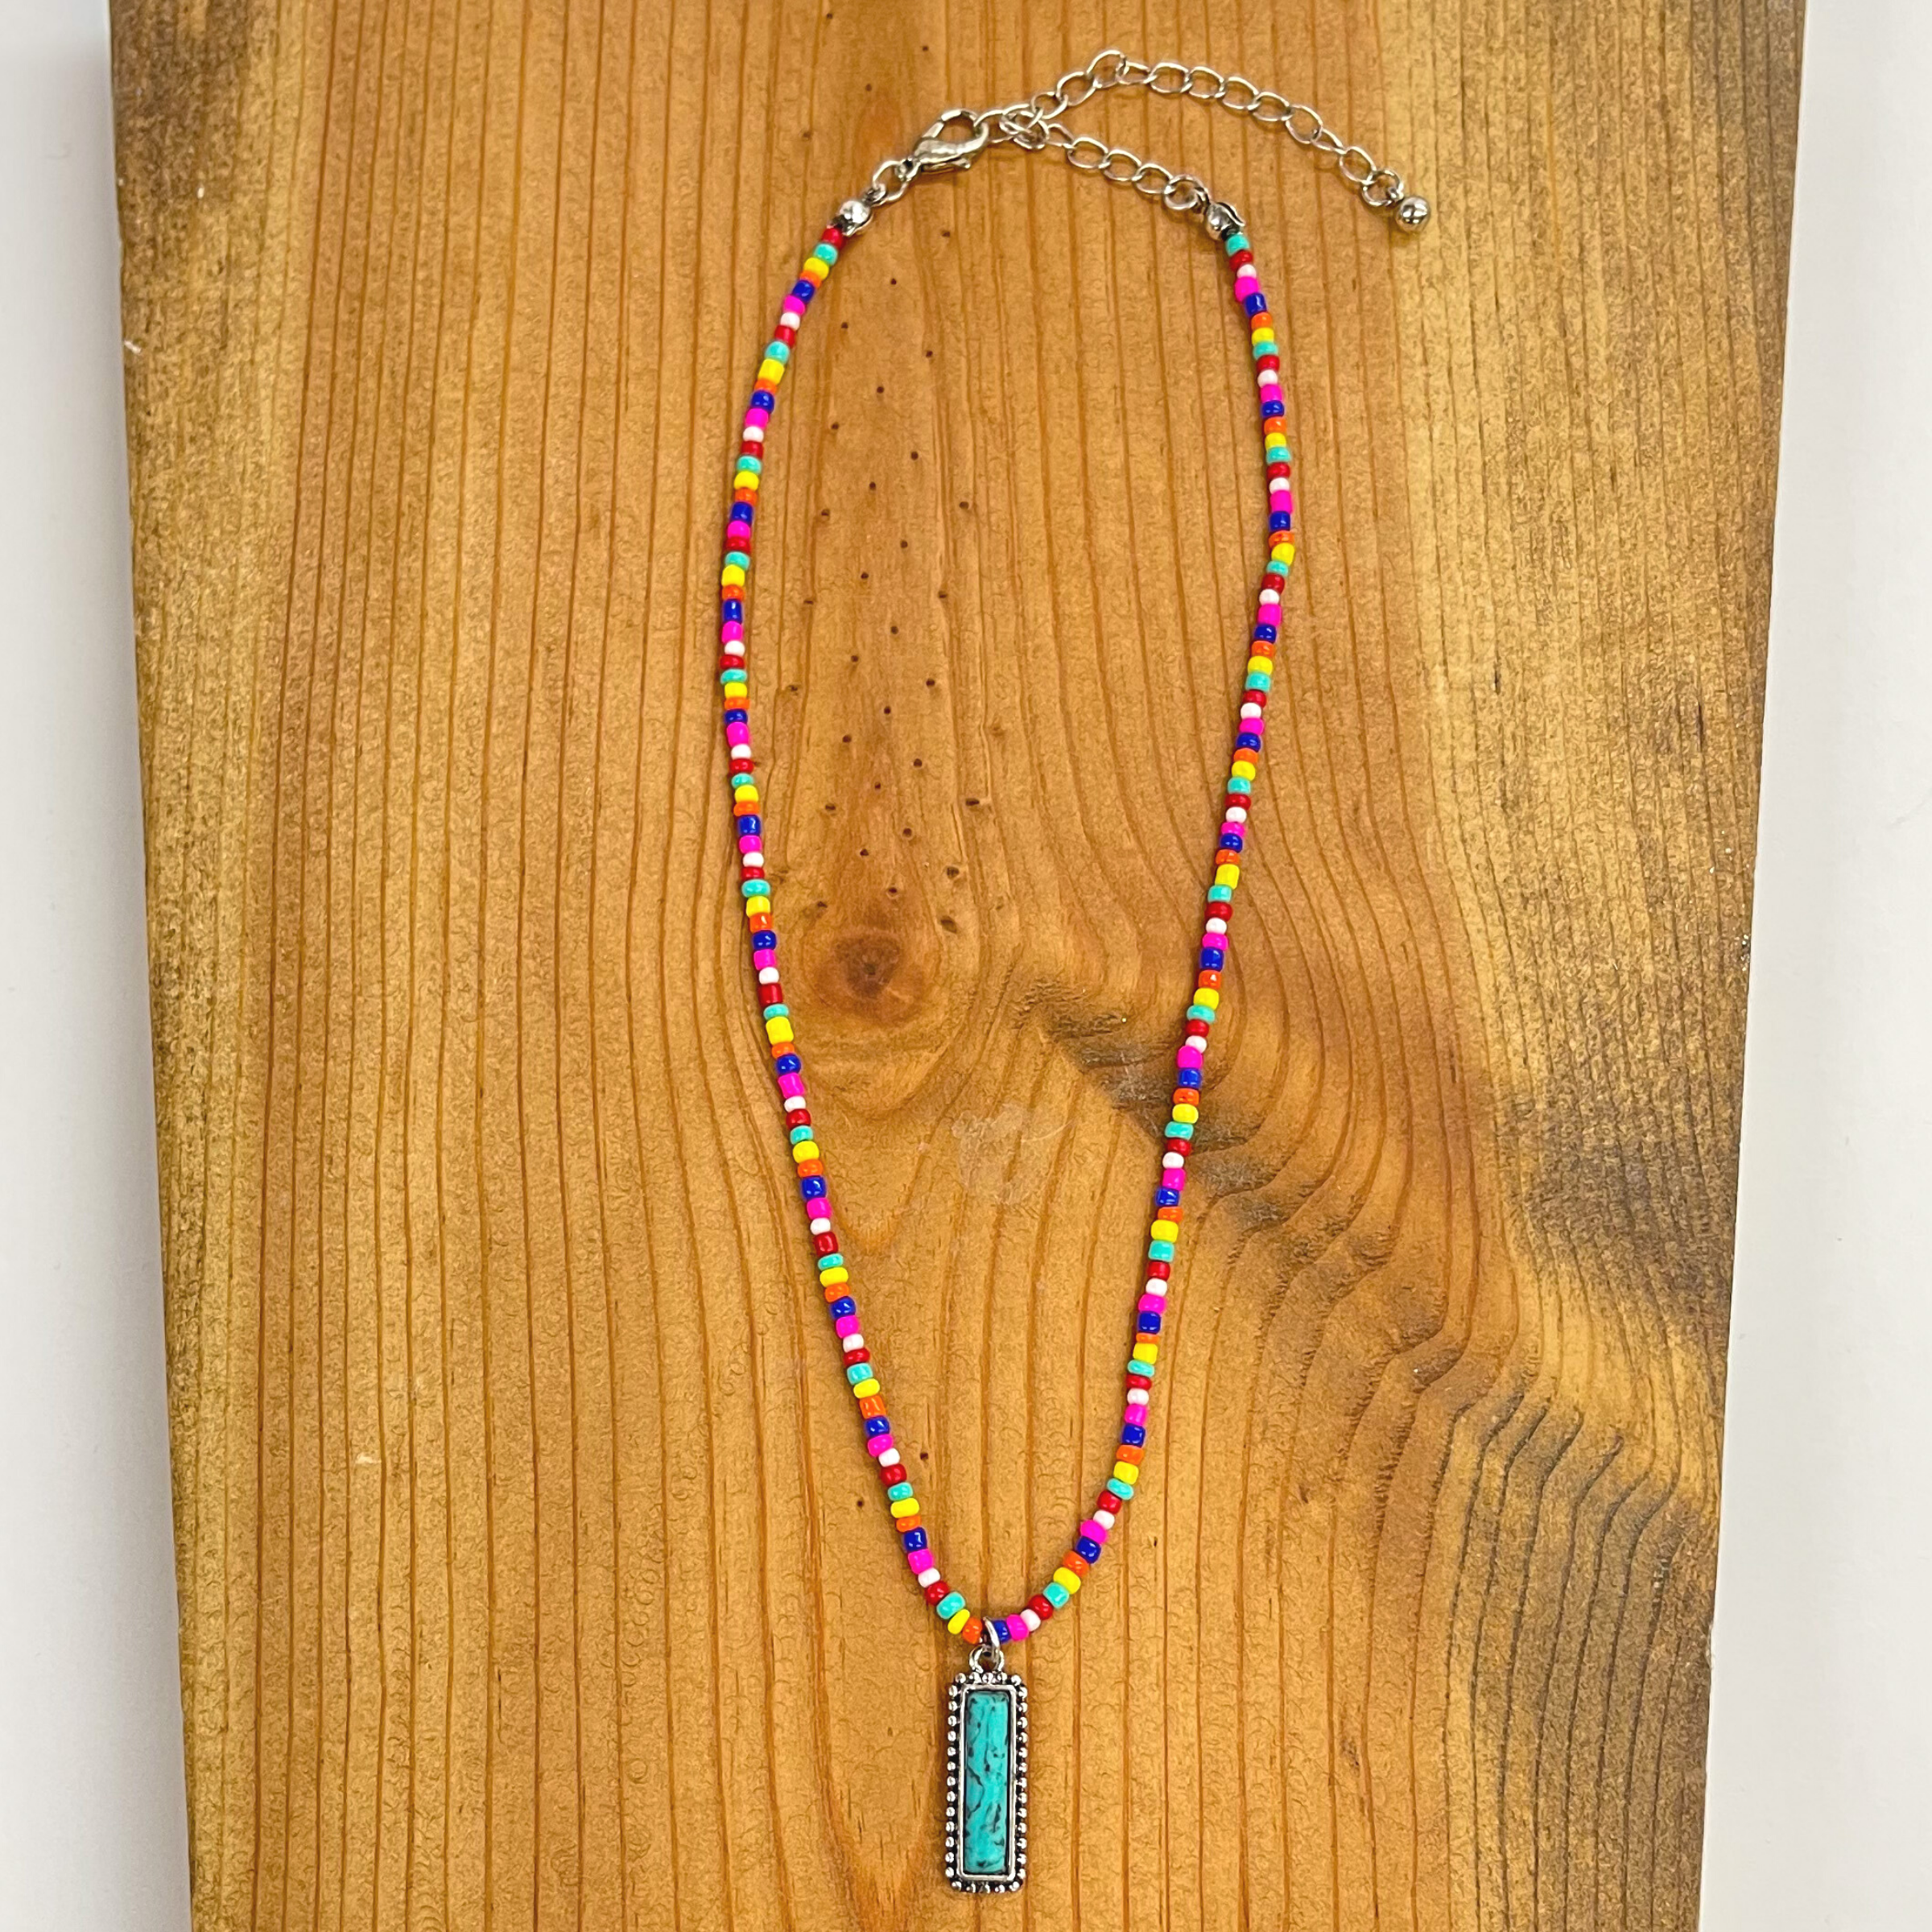 Multicolored seed beaded necklace with a silver  adjustable and pendant. The beads  are turquoise, hot pink, dark blue, red, orange,  yellow, and white. There is a turquoise stone bar  pendant in the middle in a silver setting. This necklace is taken on a brown  block.